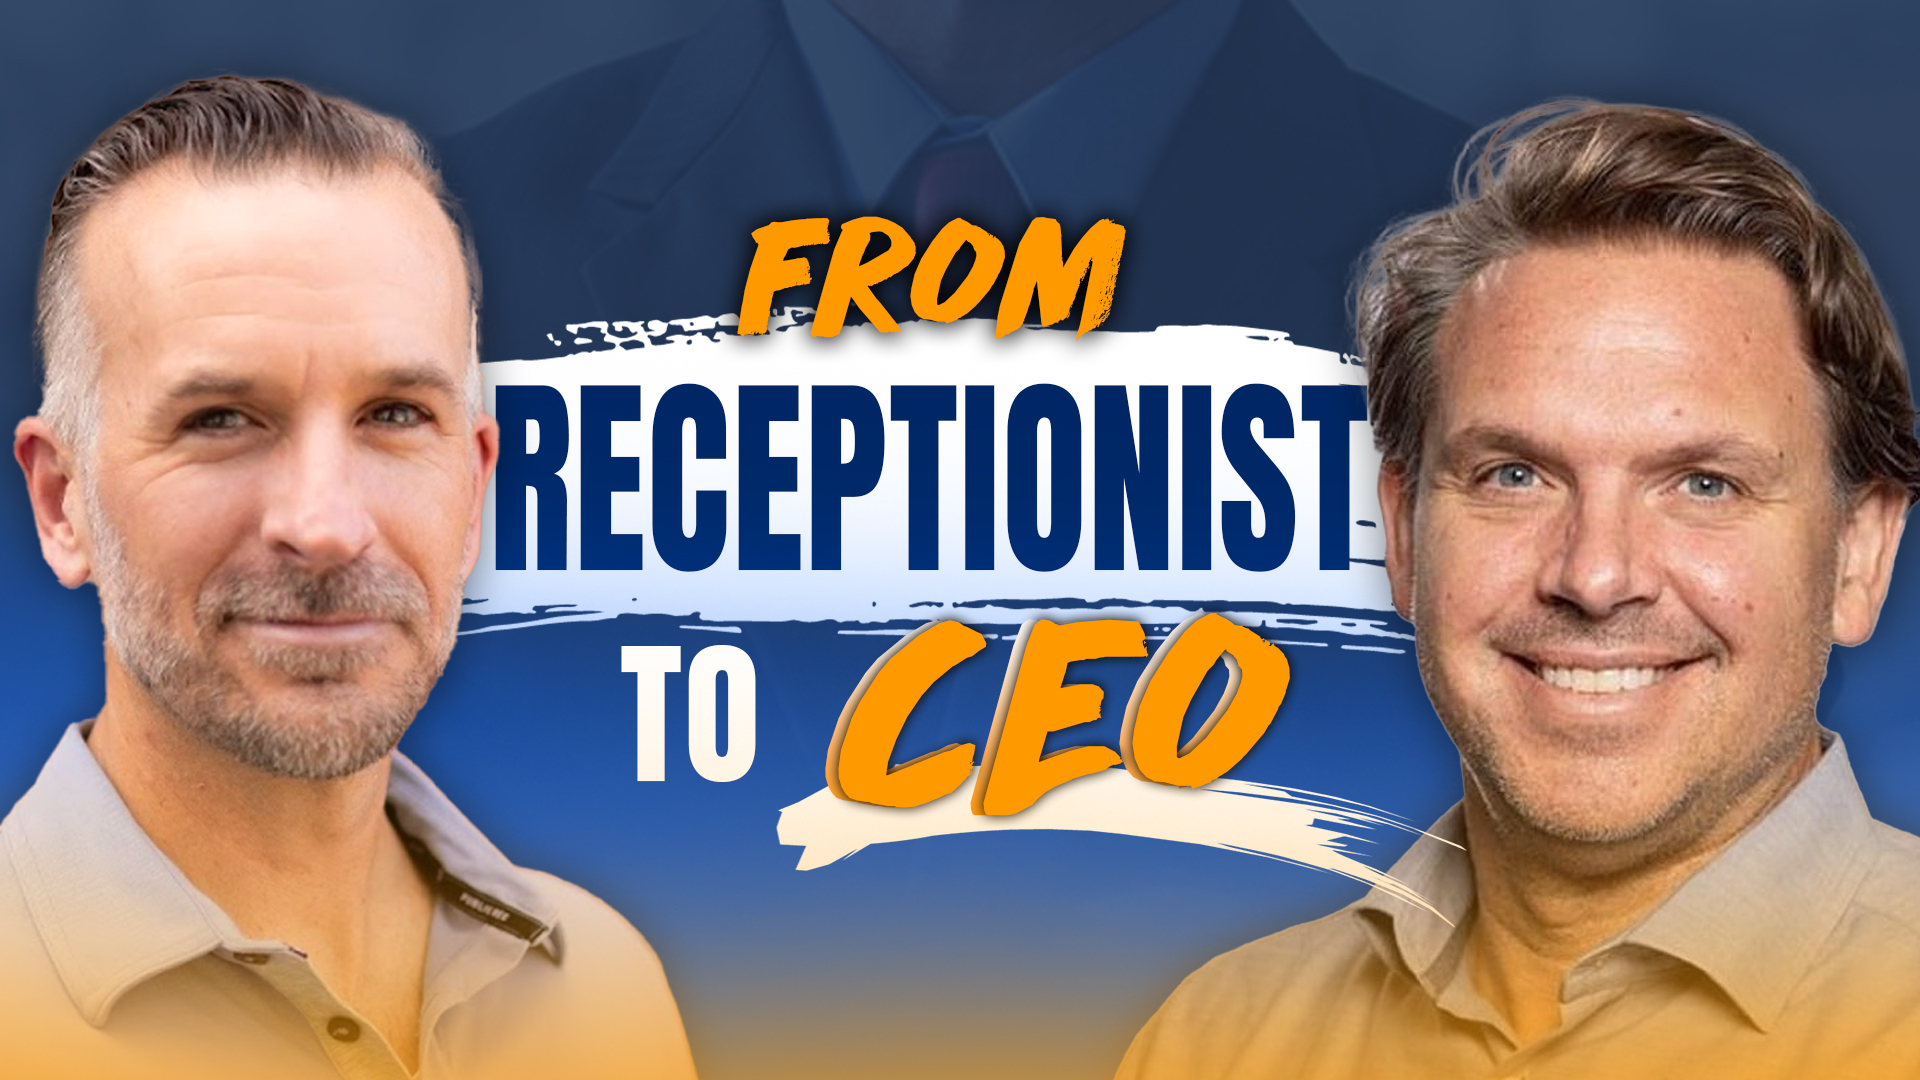 Flow Over Fear: From Receptionist to CEO